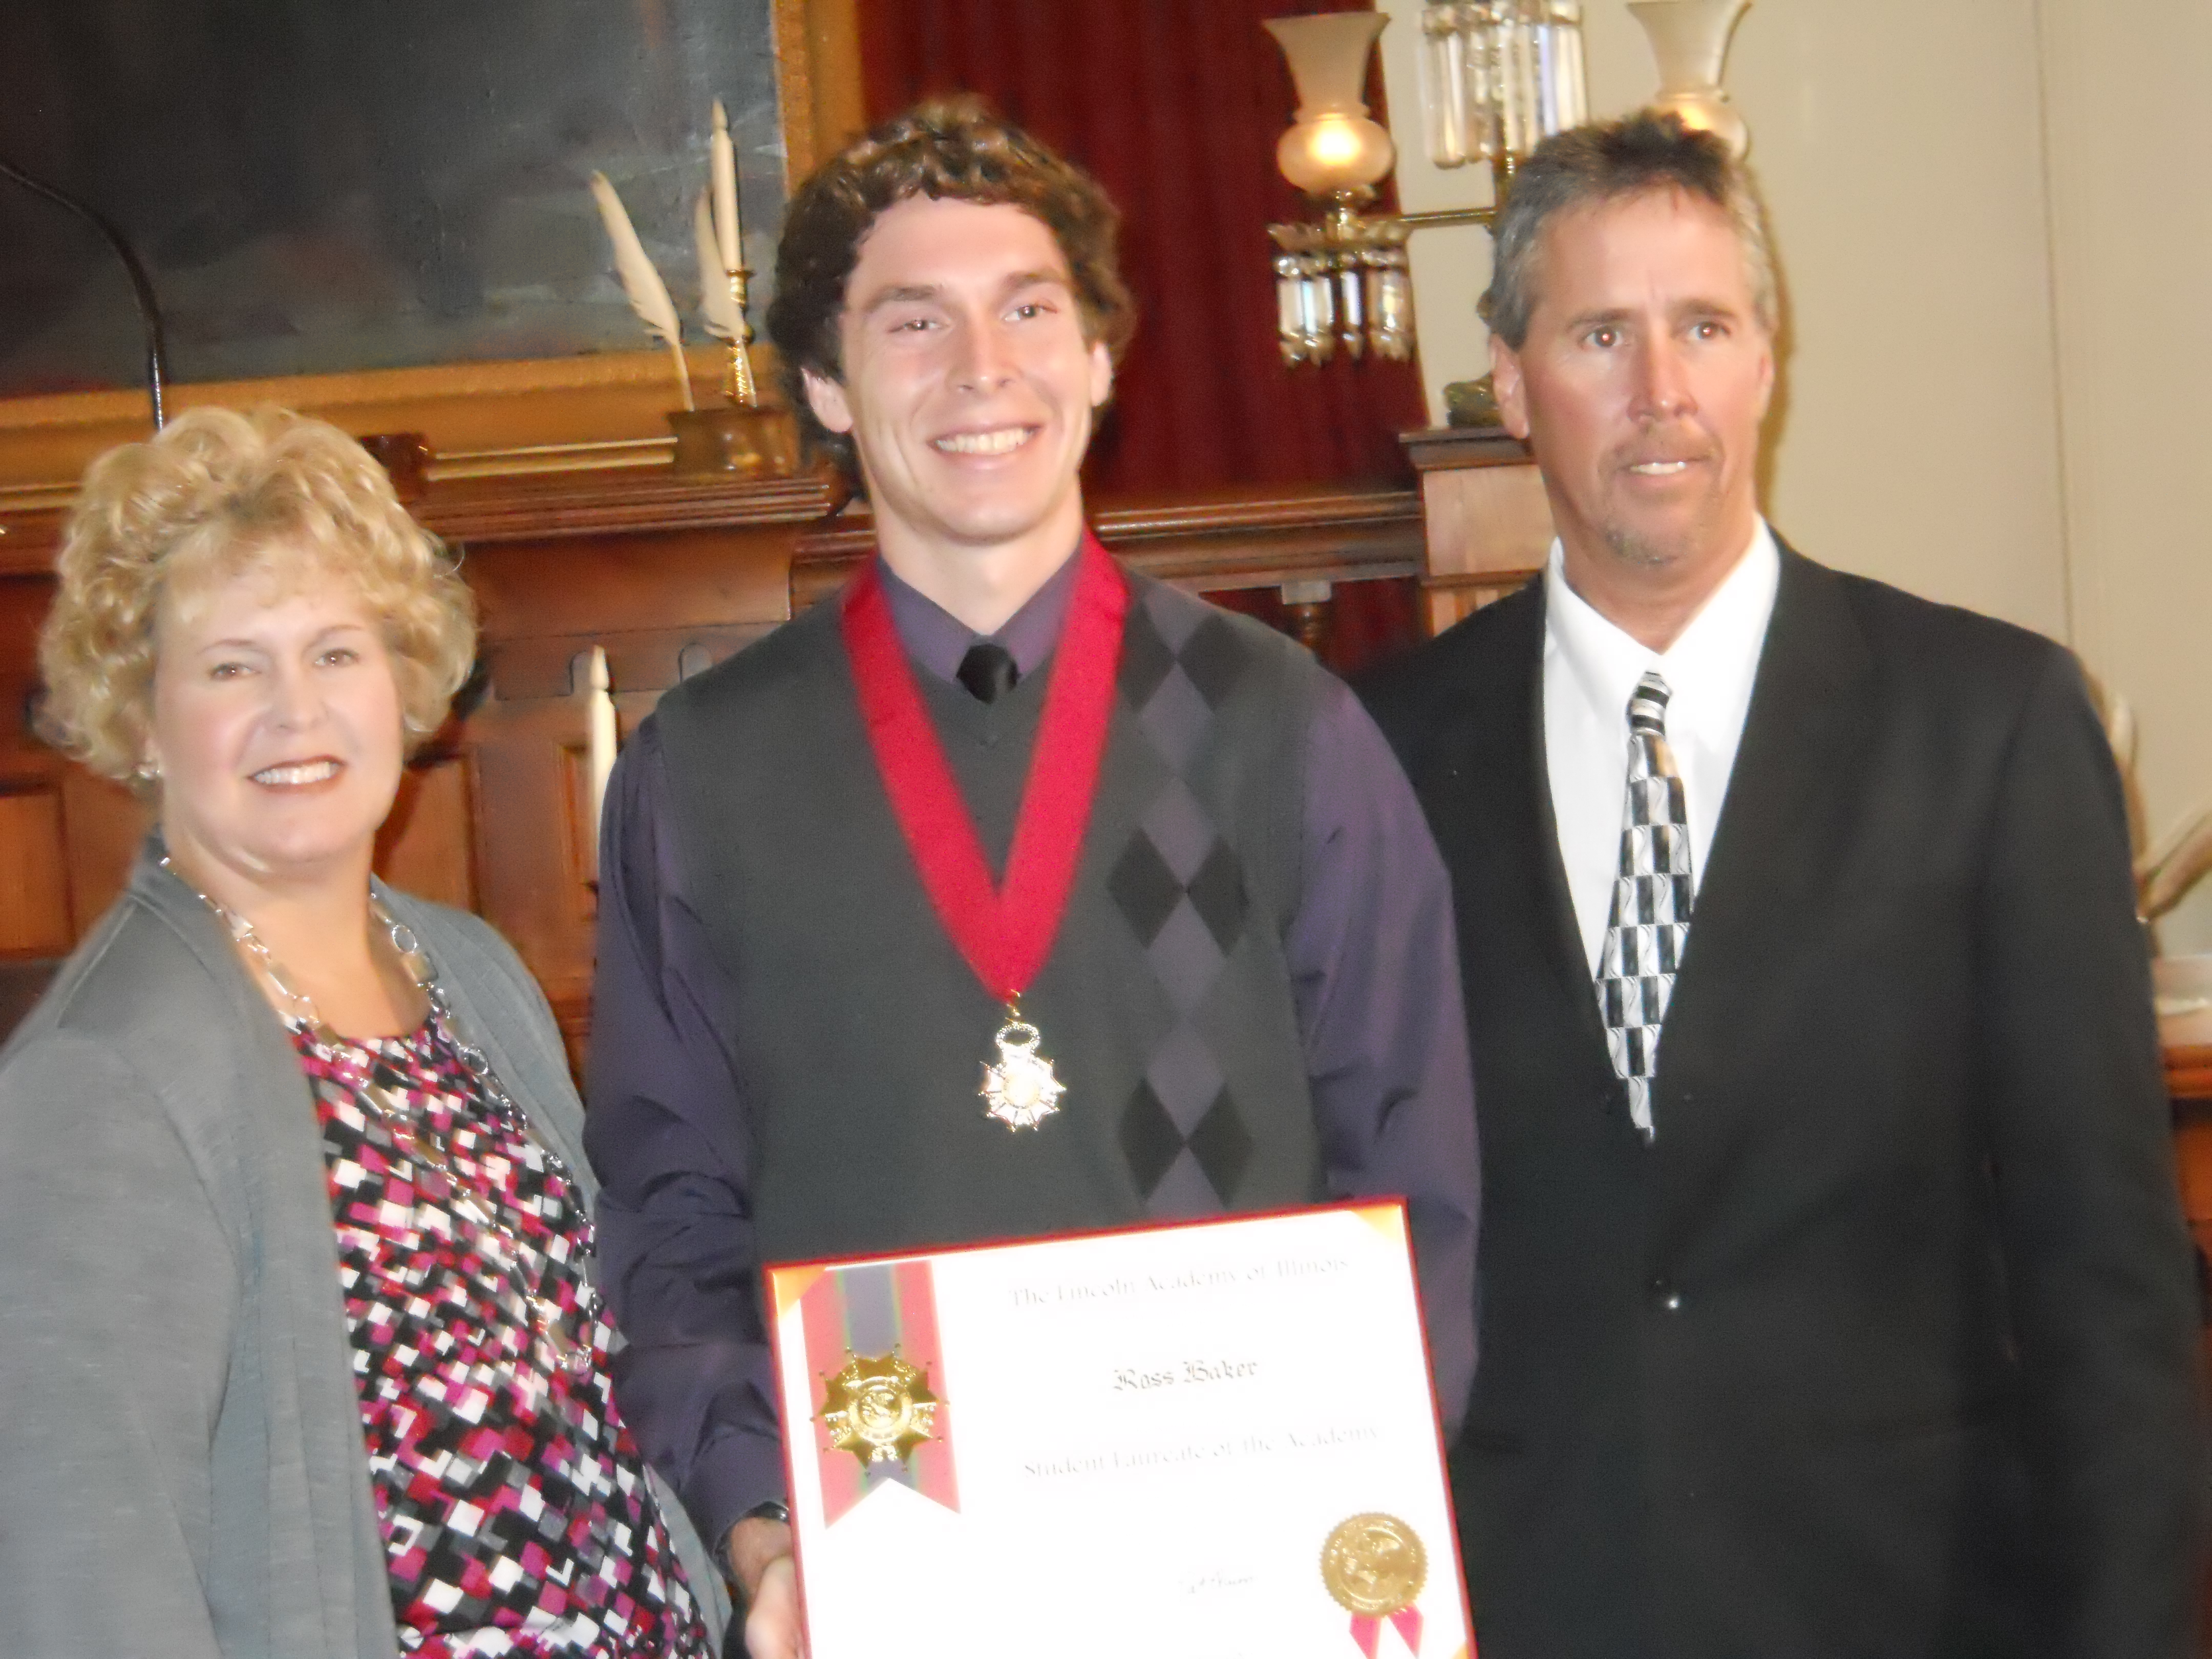 Well-Rounded Baker wins Lincoln Academy Student Laureate Award